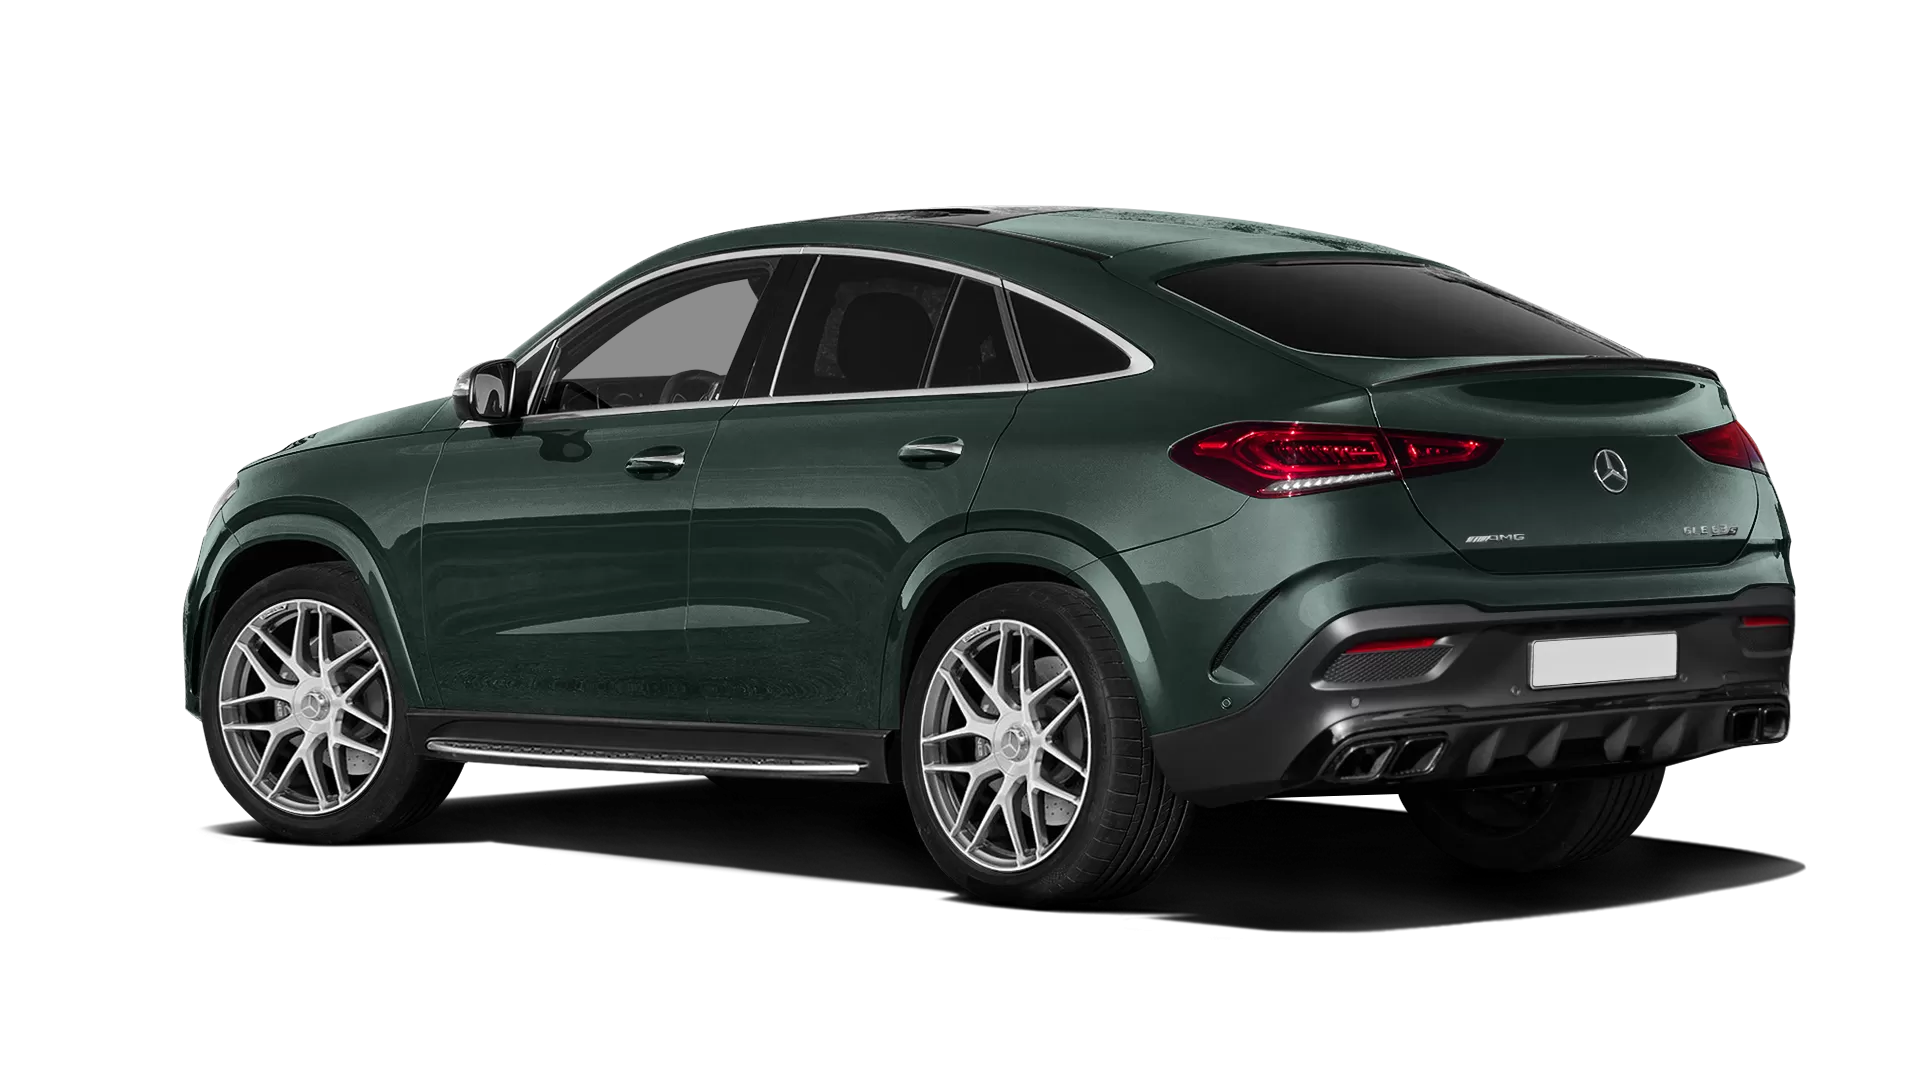 Mercedes GLE Coupe AMG 63 C167 with painted body kit: rear view shown in Emerald Green